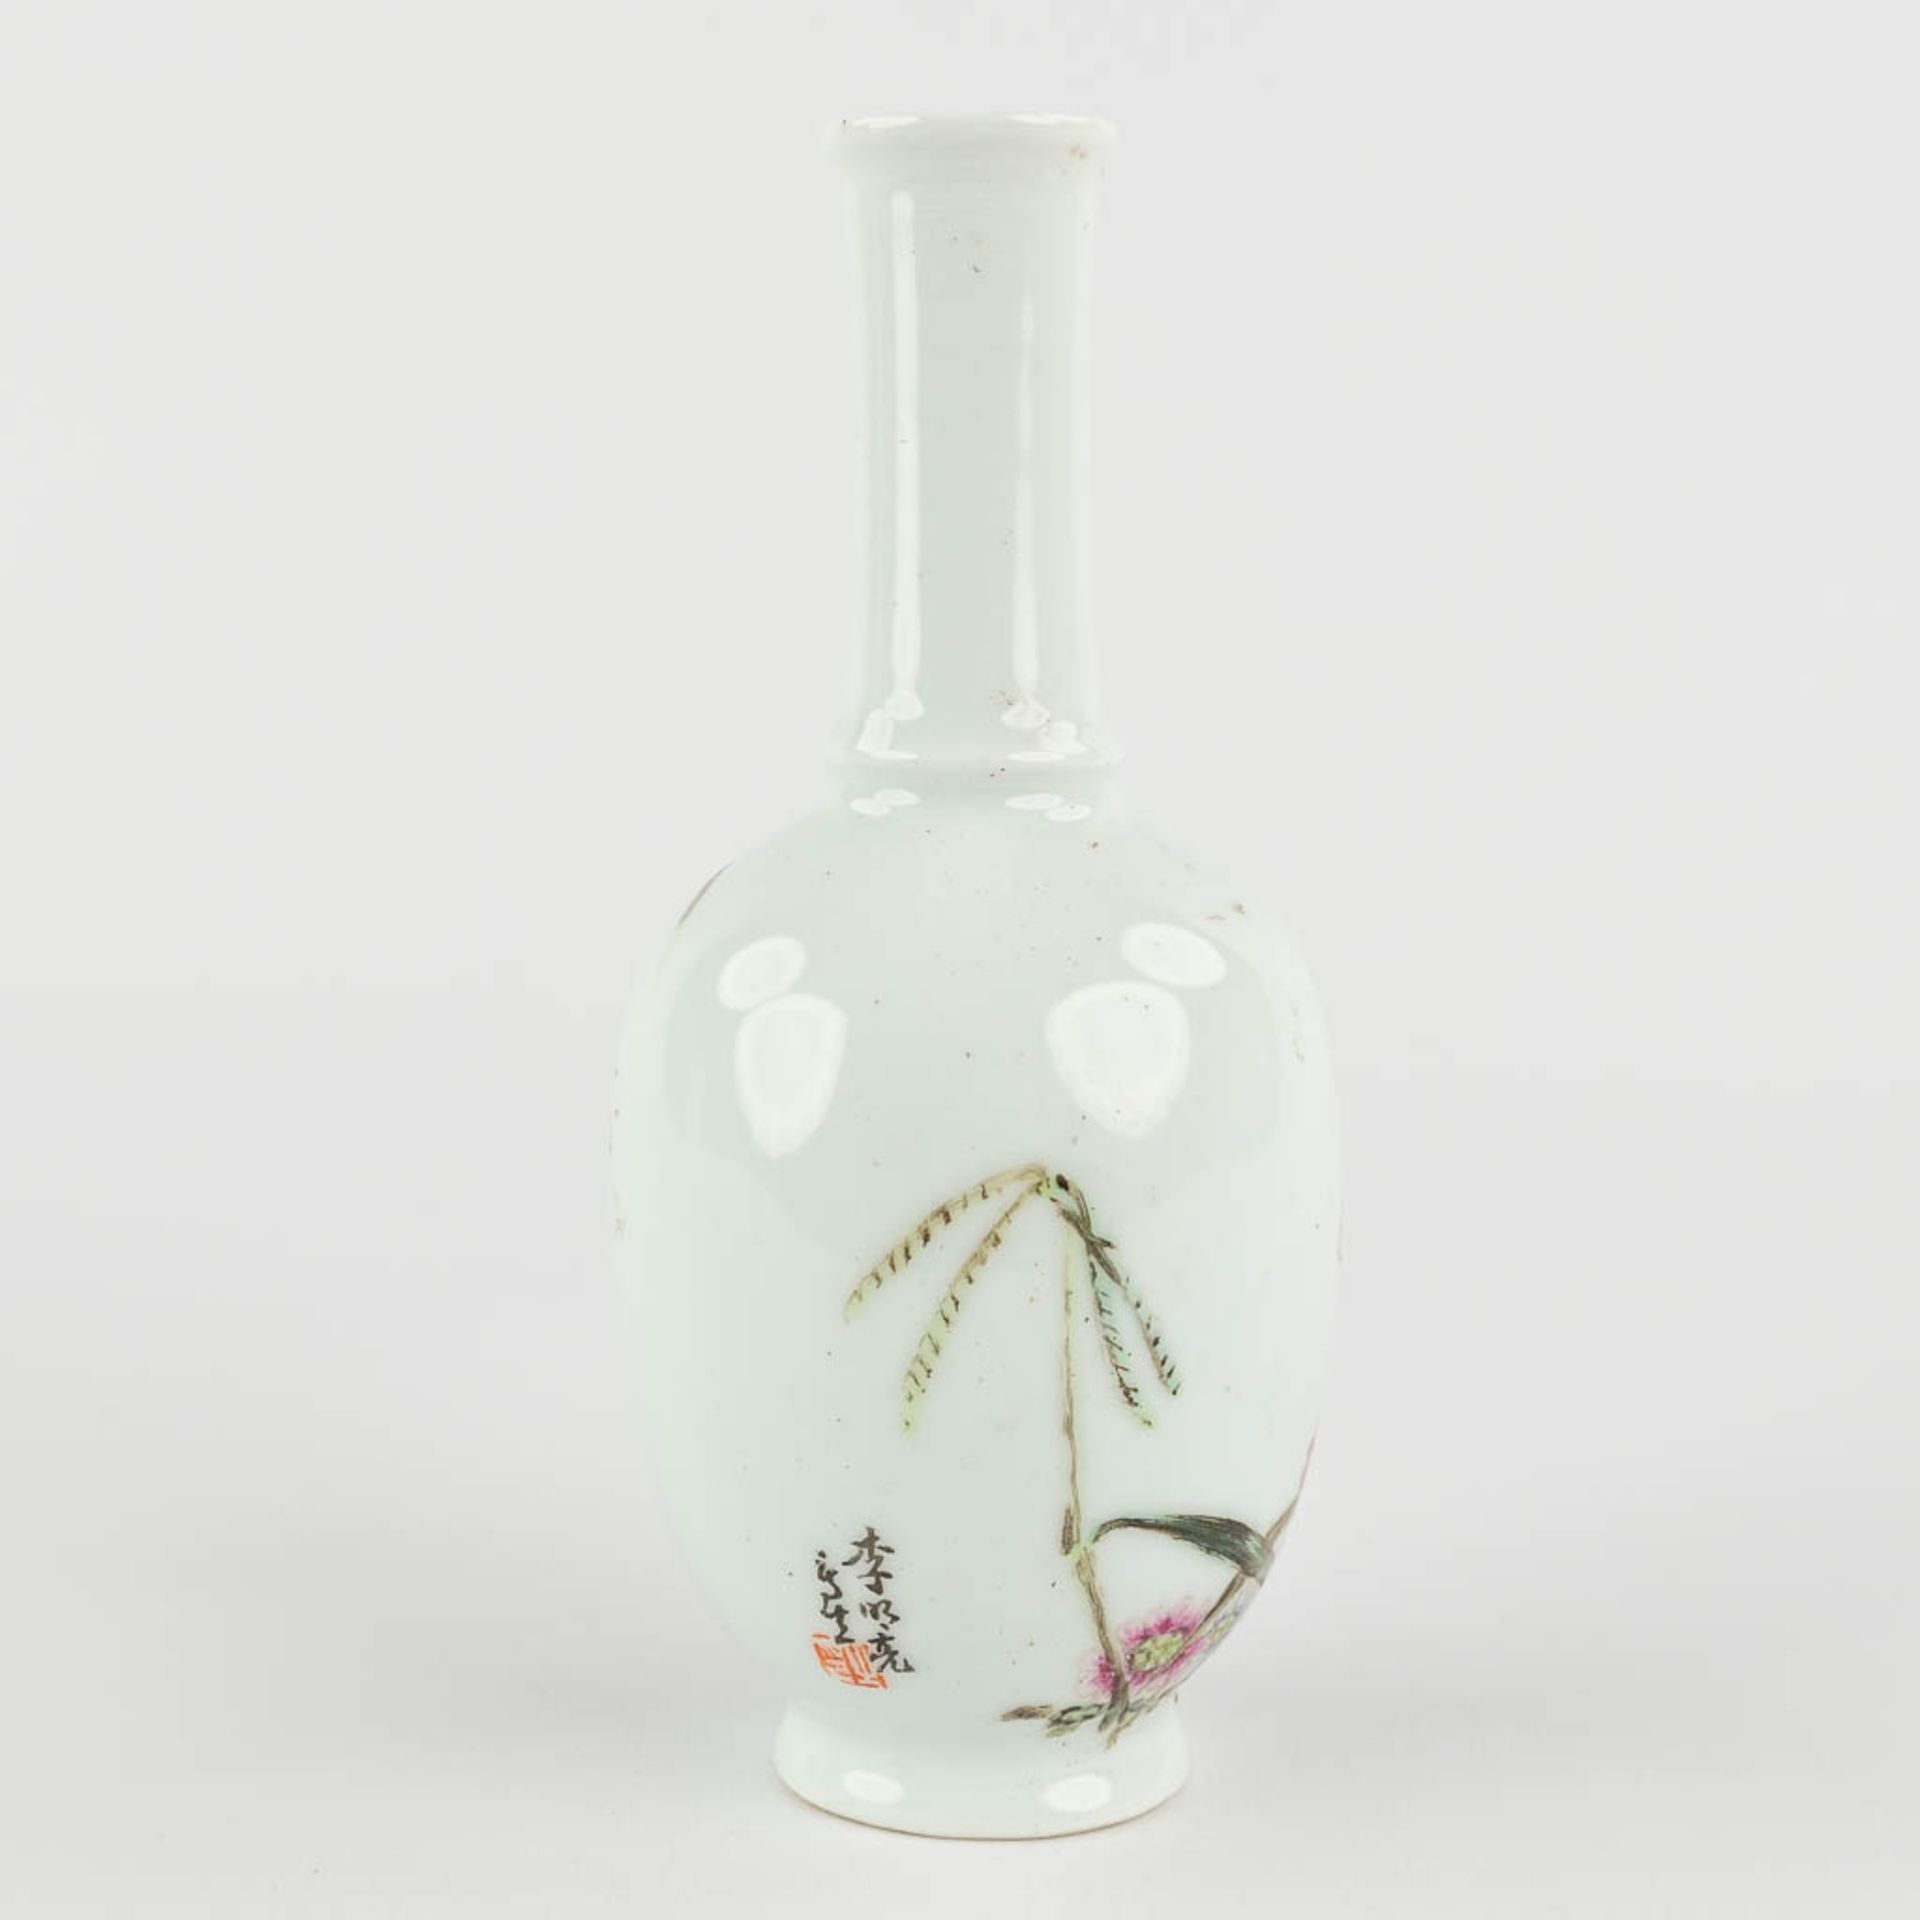 Li mingliang, A Chinese vase with decor of a dragonfly. 20th C. (H:14 x D:6,5 cm) - Bild 4 aus 9